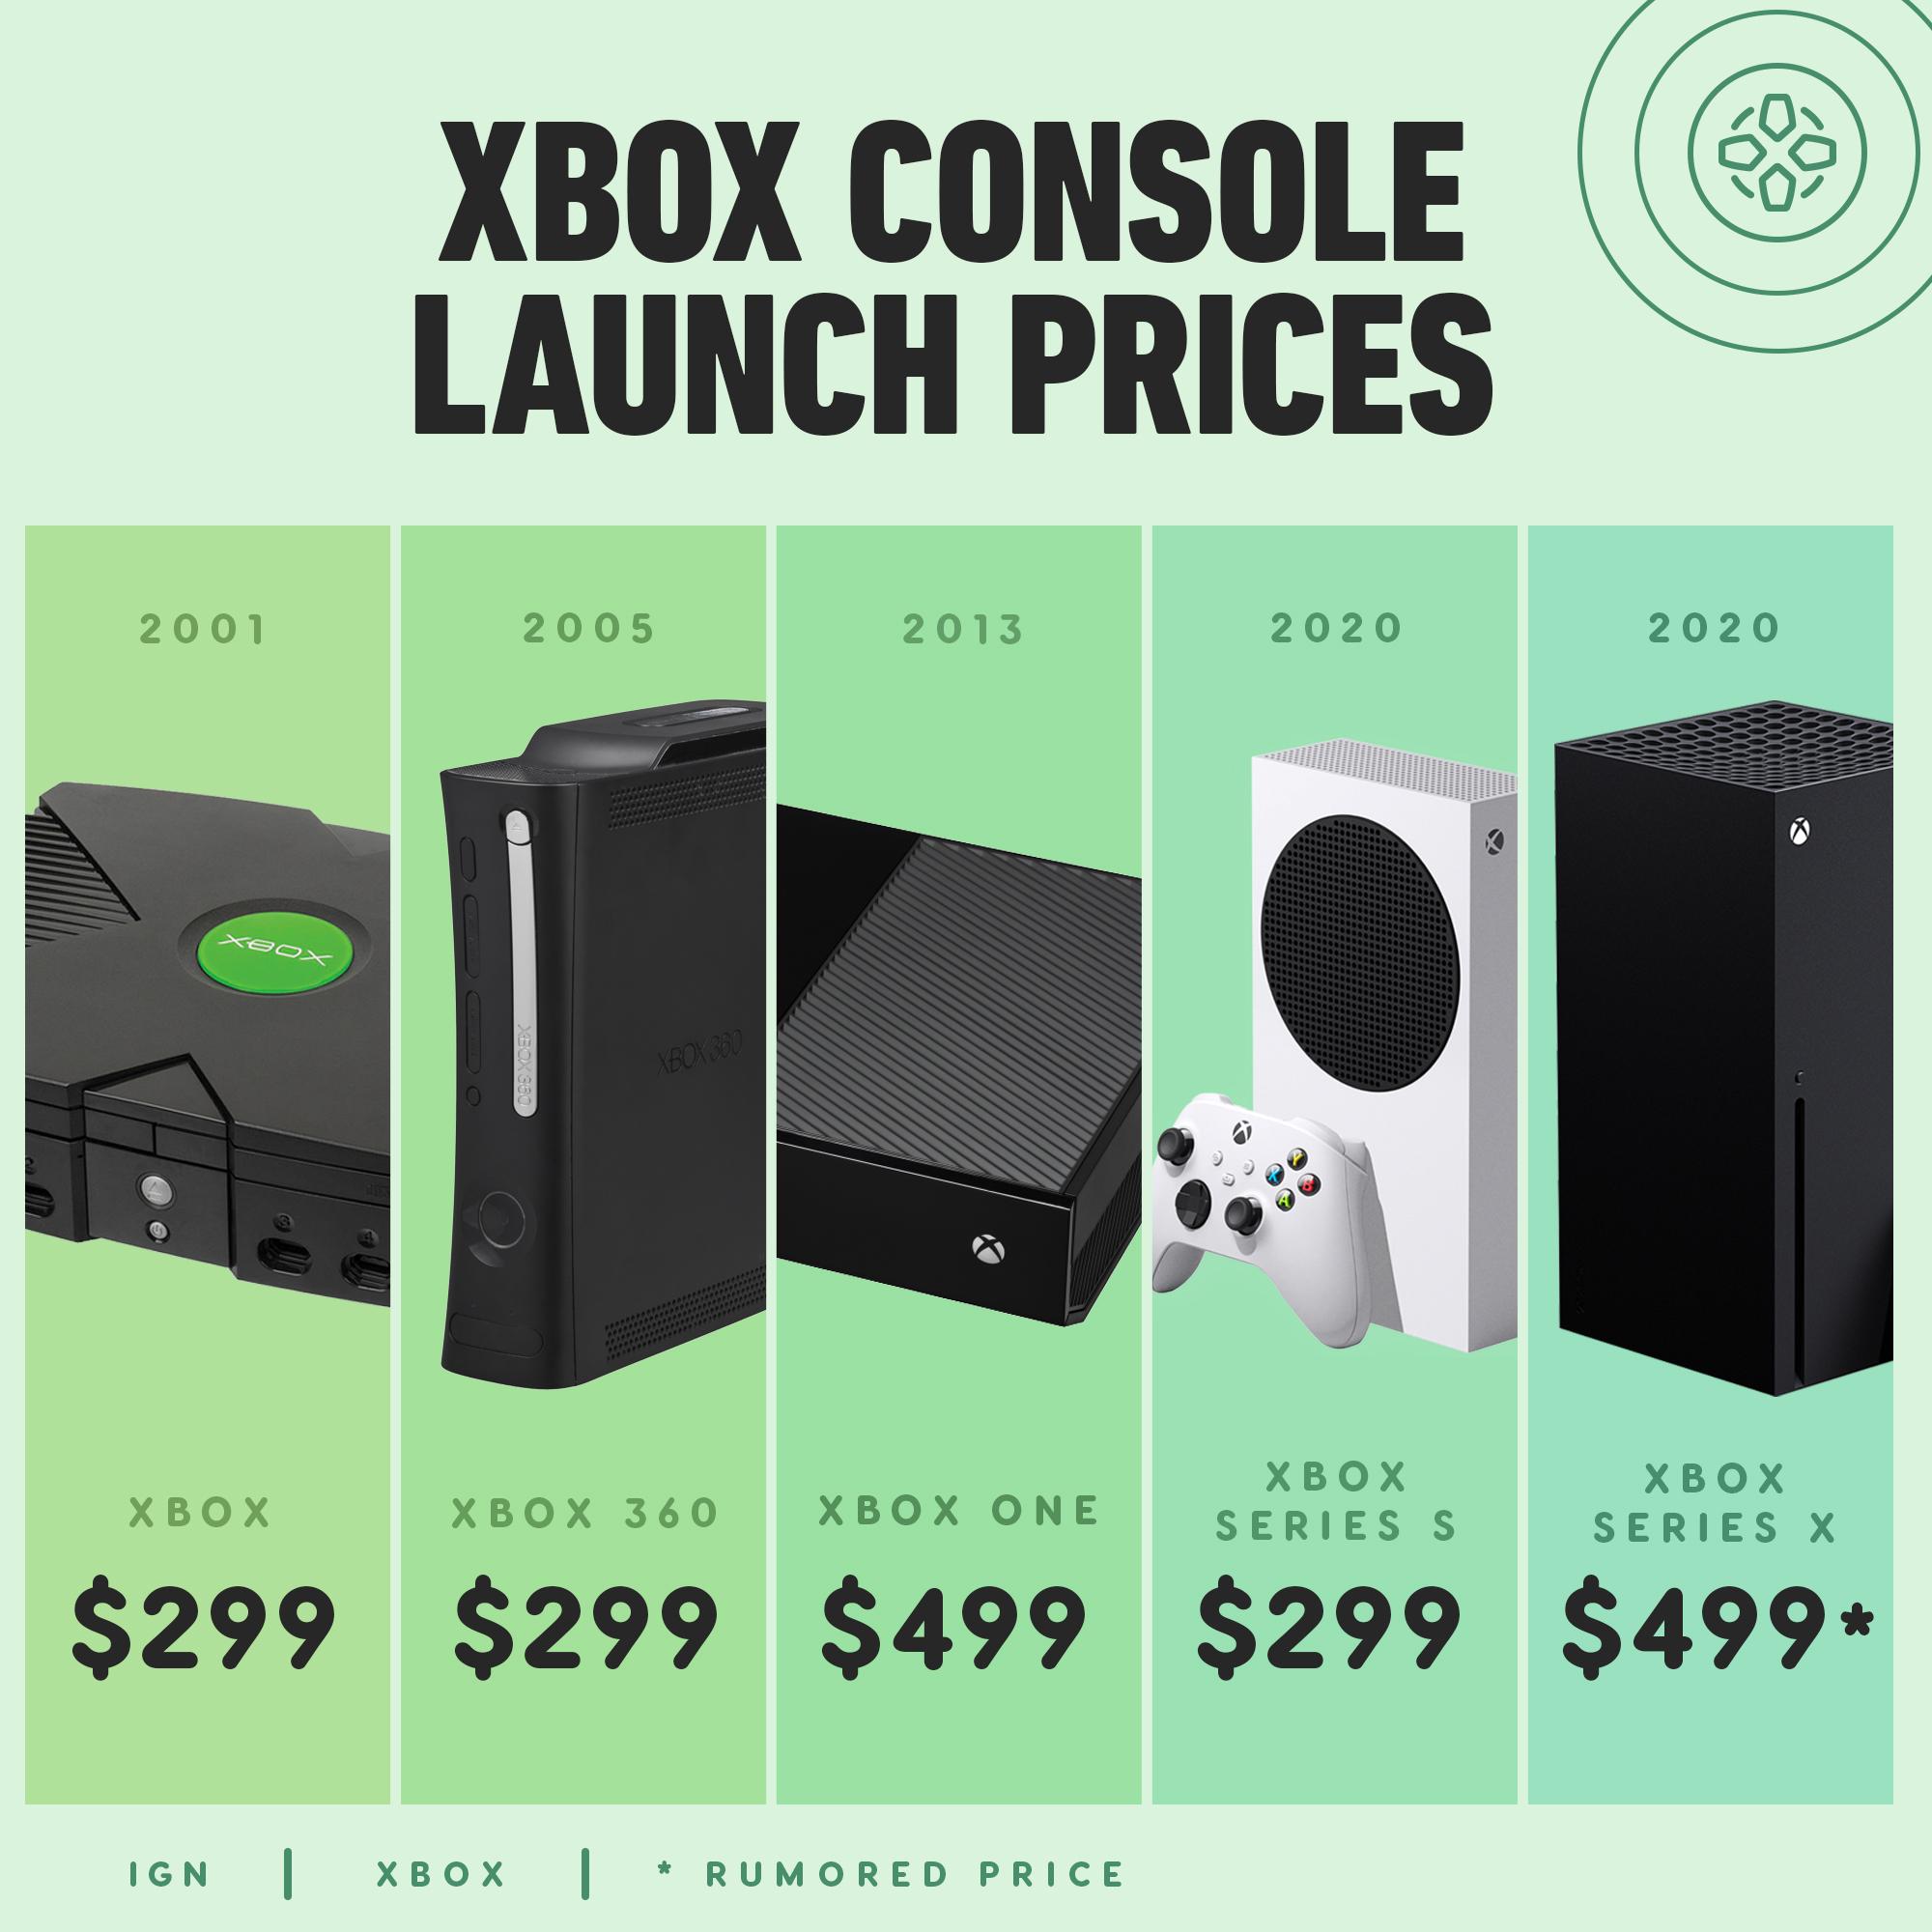 efterskrift Spaceship greb IGN on Twitter: "With Xbox Series X's price still rumored and Series S  confirmed after being leaked last night, here is how they compare to the  launch prices of Xbox's base consoles